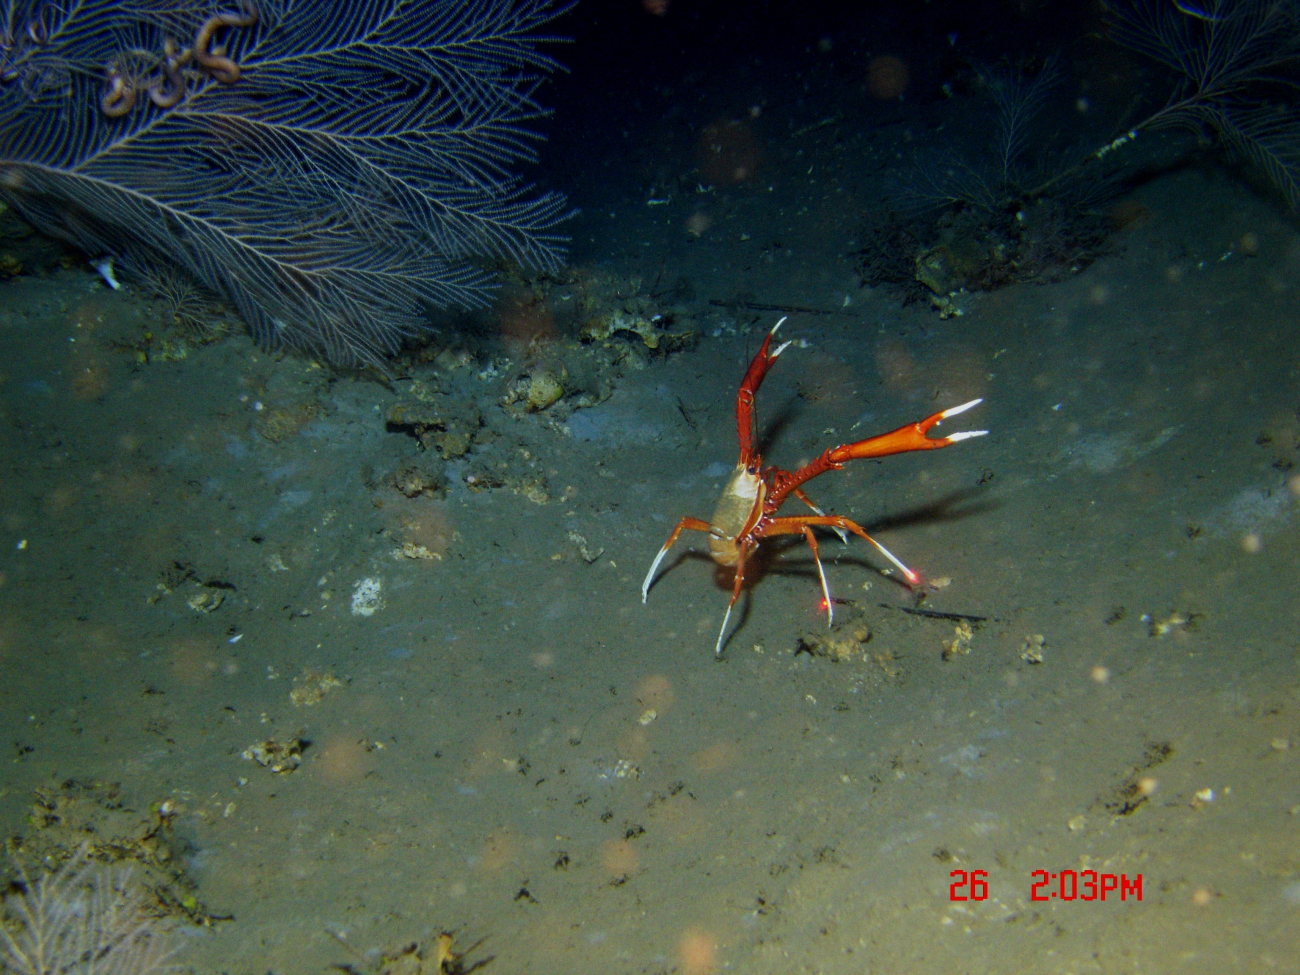 Squat lobster with chelae open and ready for action